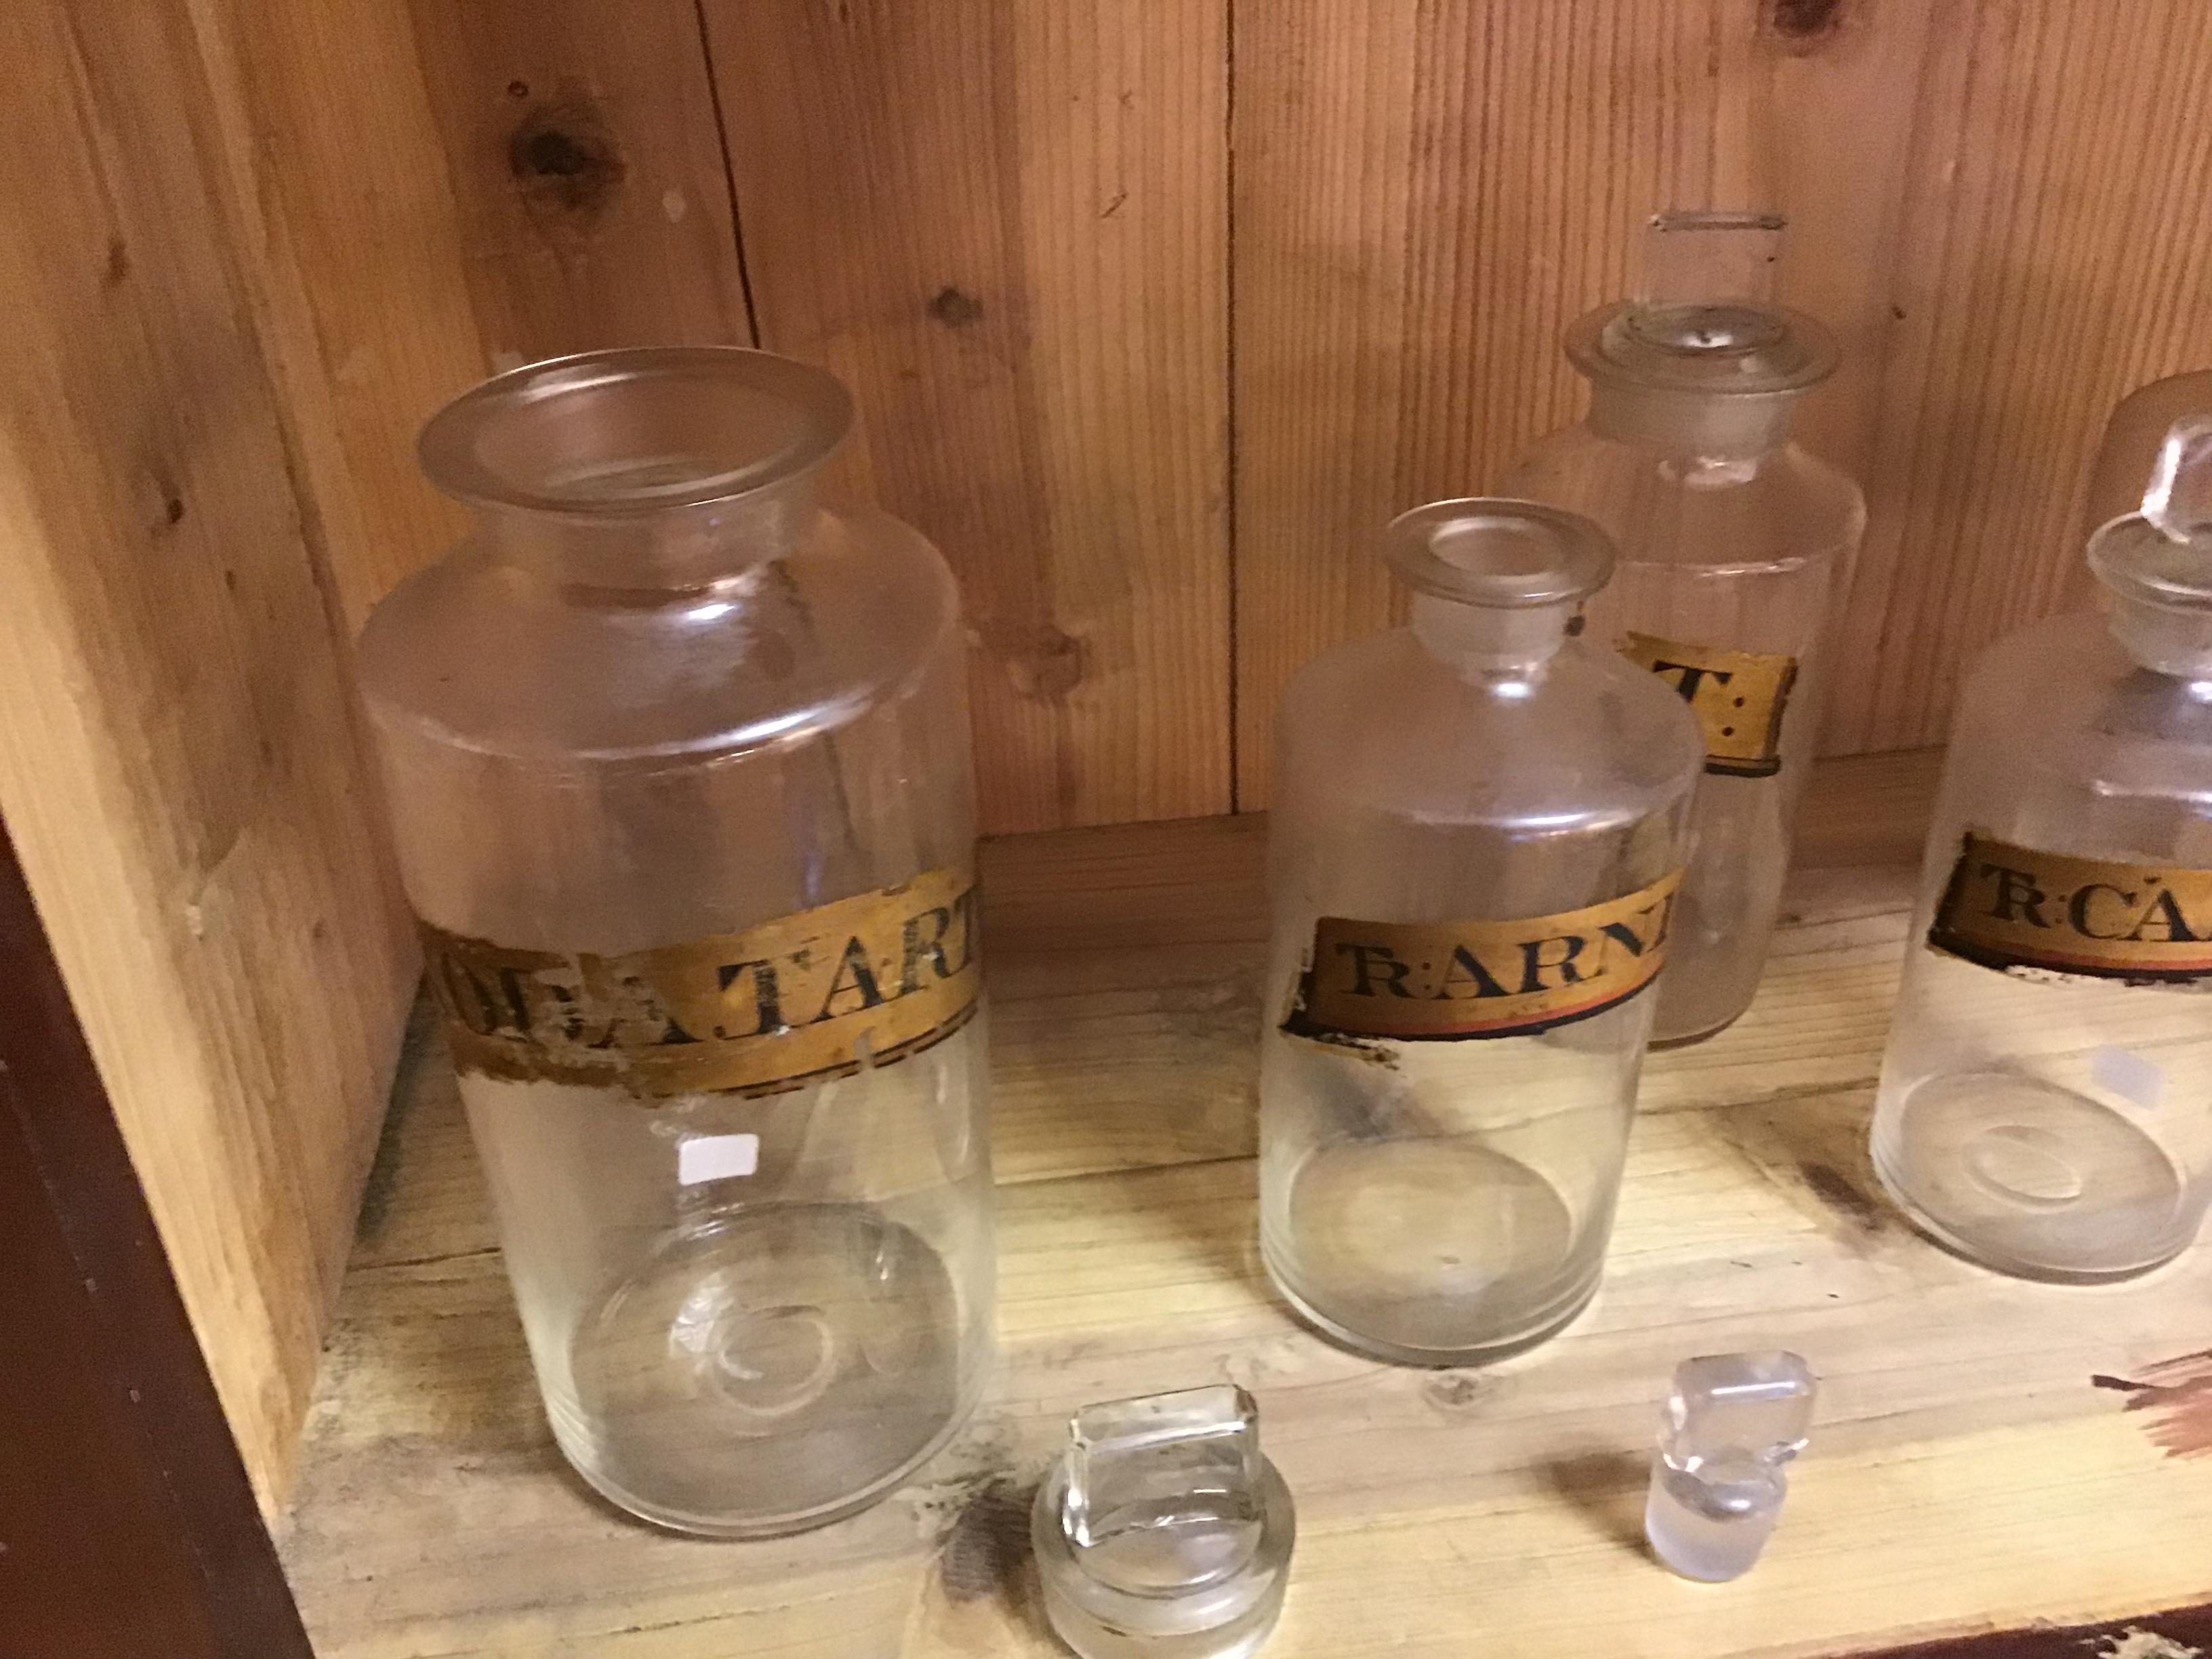 A set of 8 chemist’s bottles with original stoppers and labels 
All in good conditions with no damage.
Cc Victorian U.K.